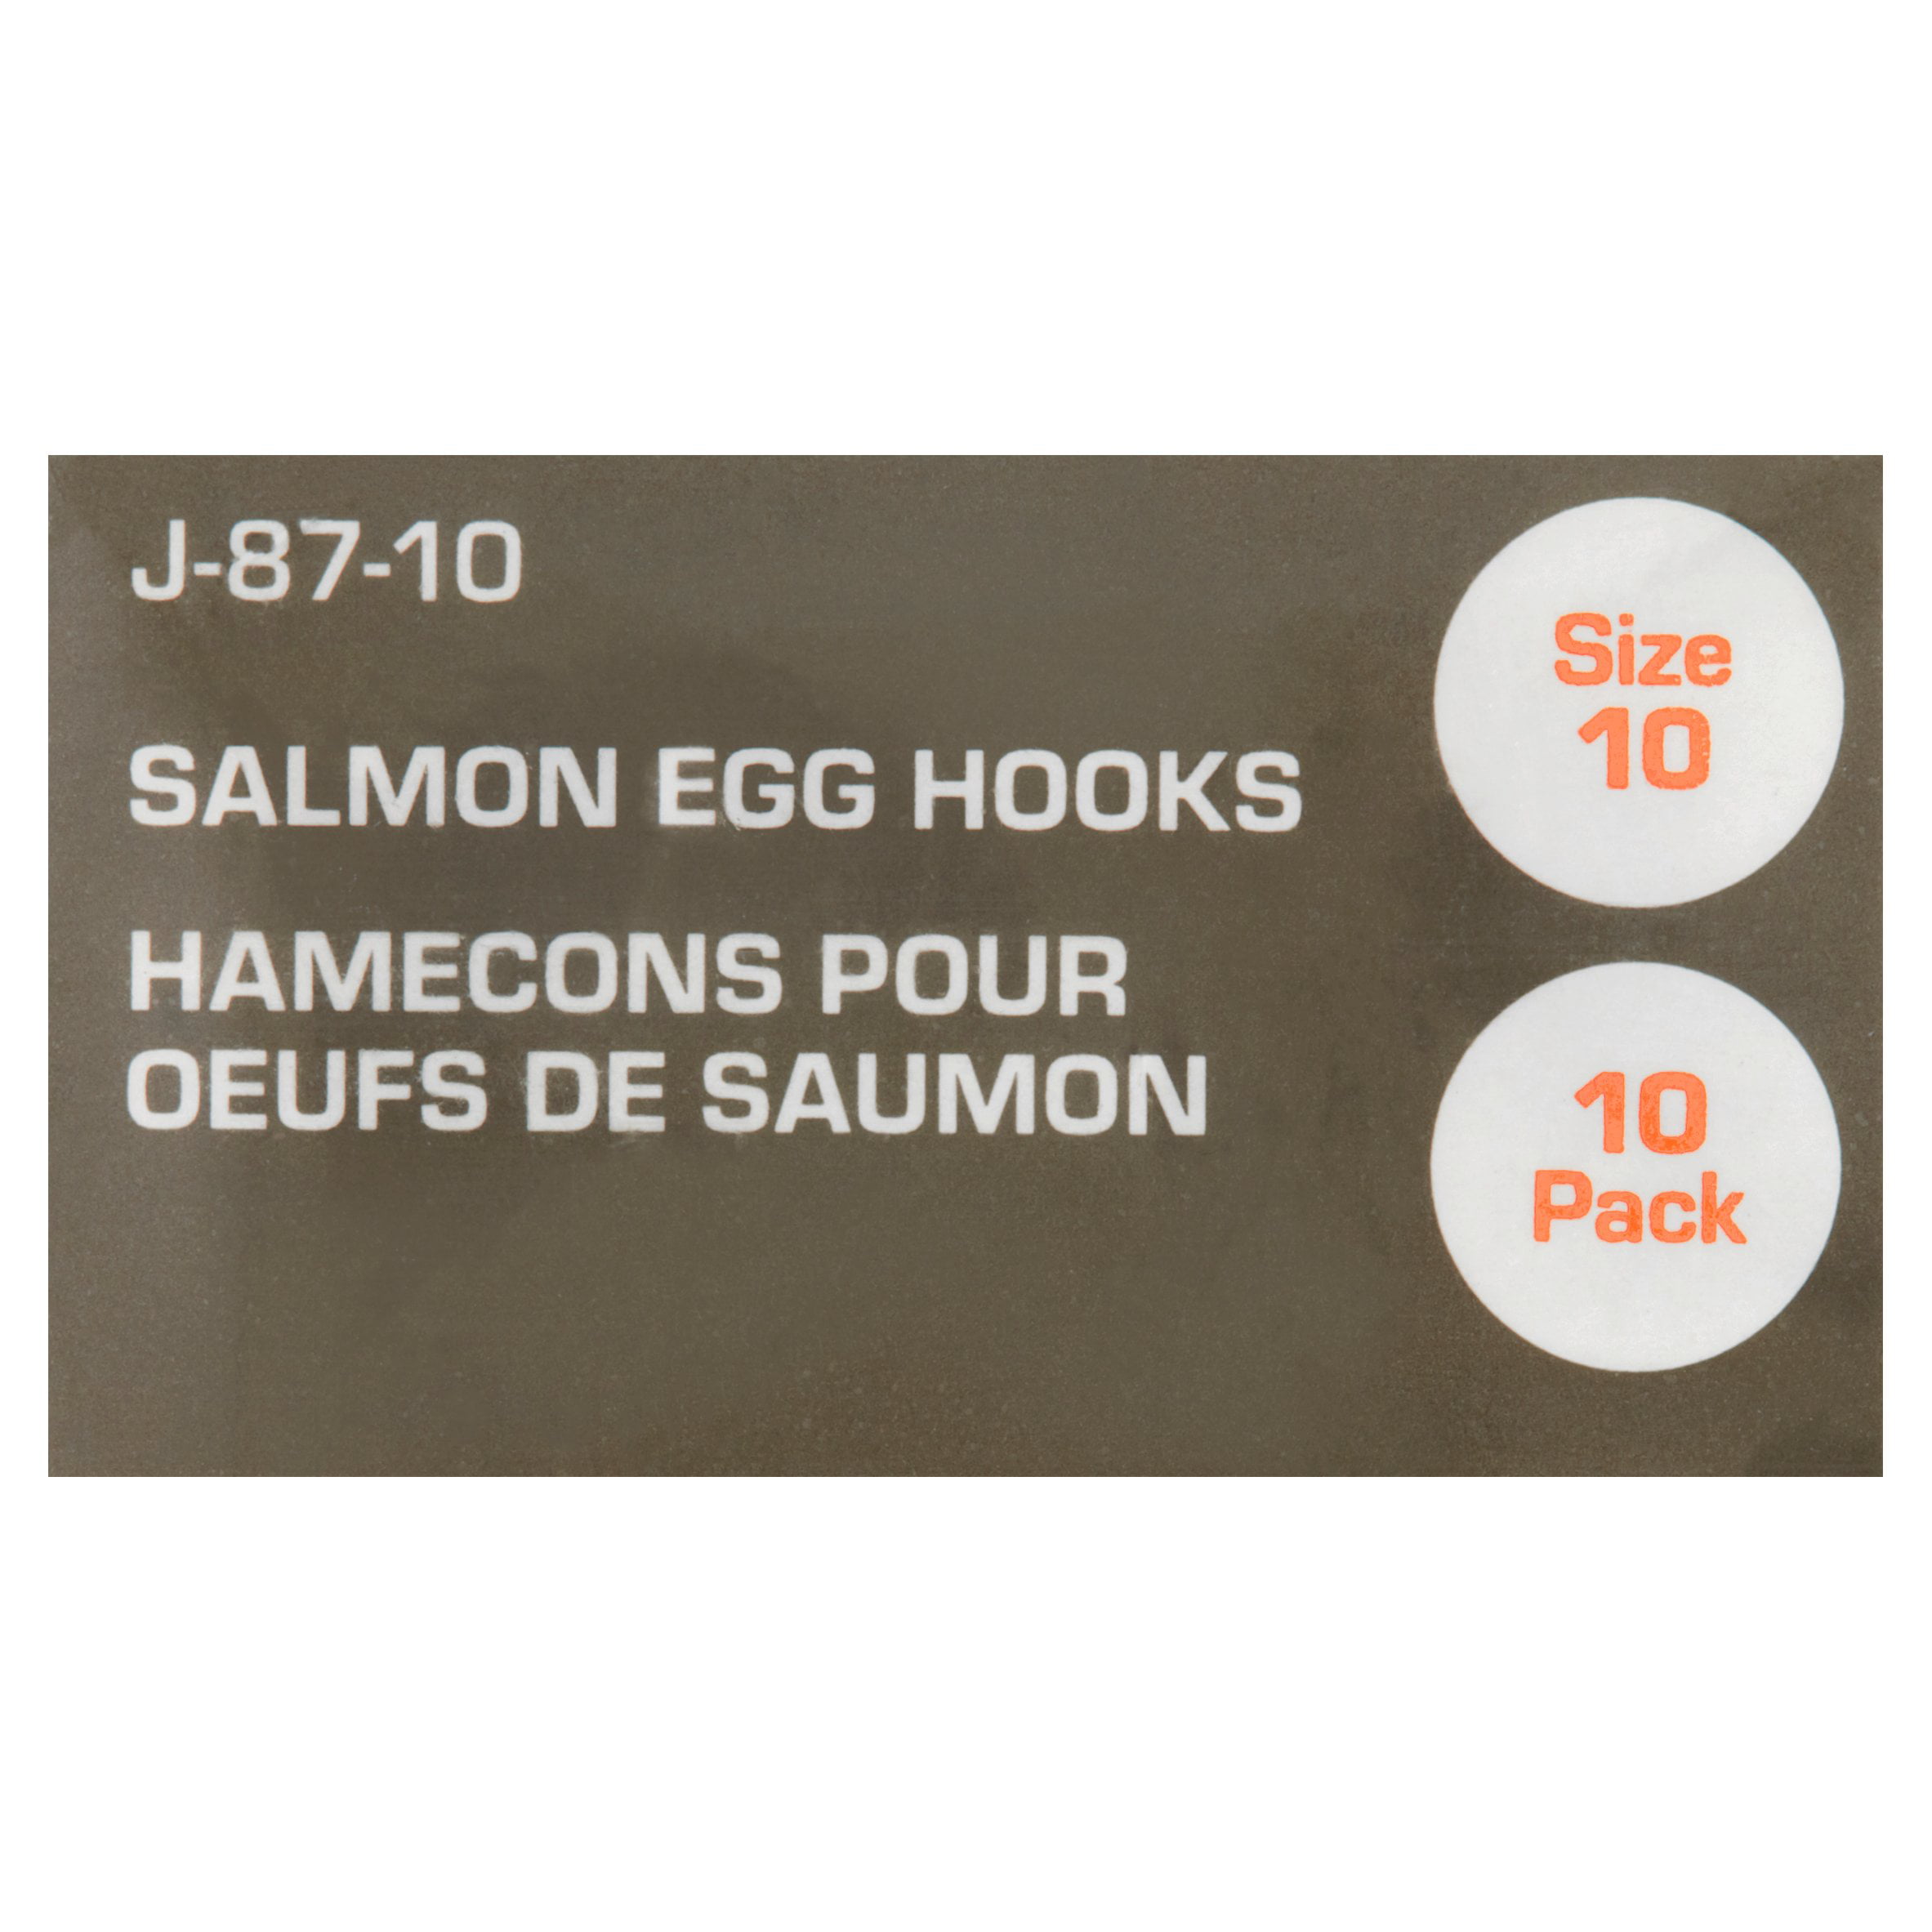 CLOSEOUT* SOUTHBEND SALMON EGG HOOKS SIZE 12 - 10 PACK - Northwoods  Wholesale Outlet